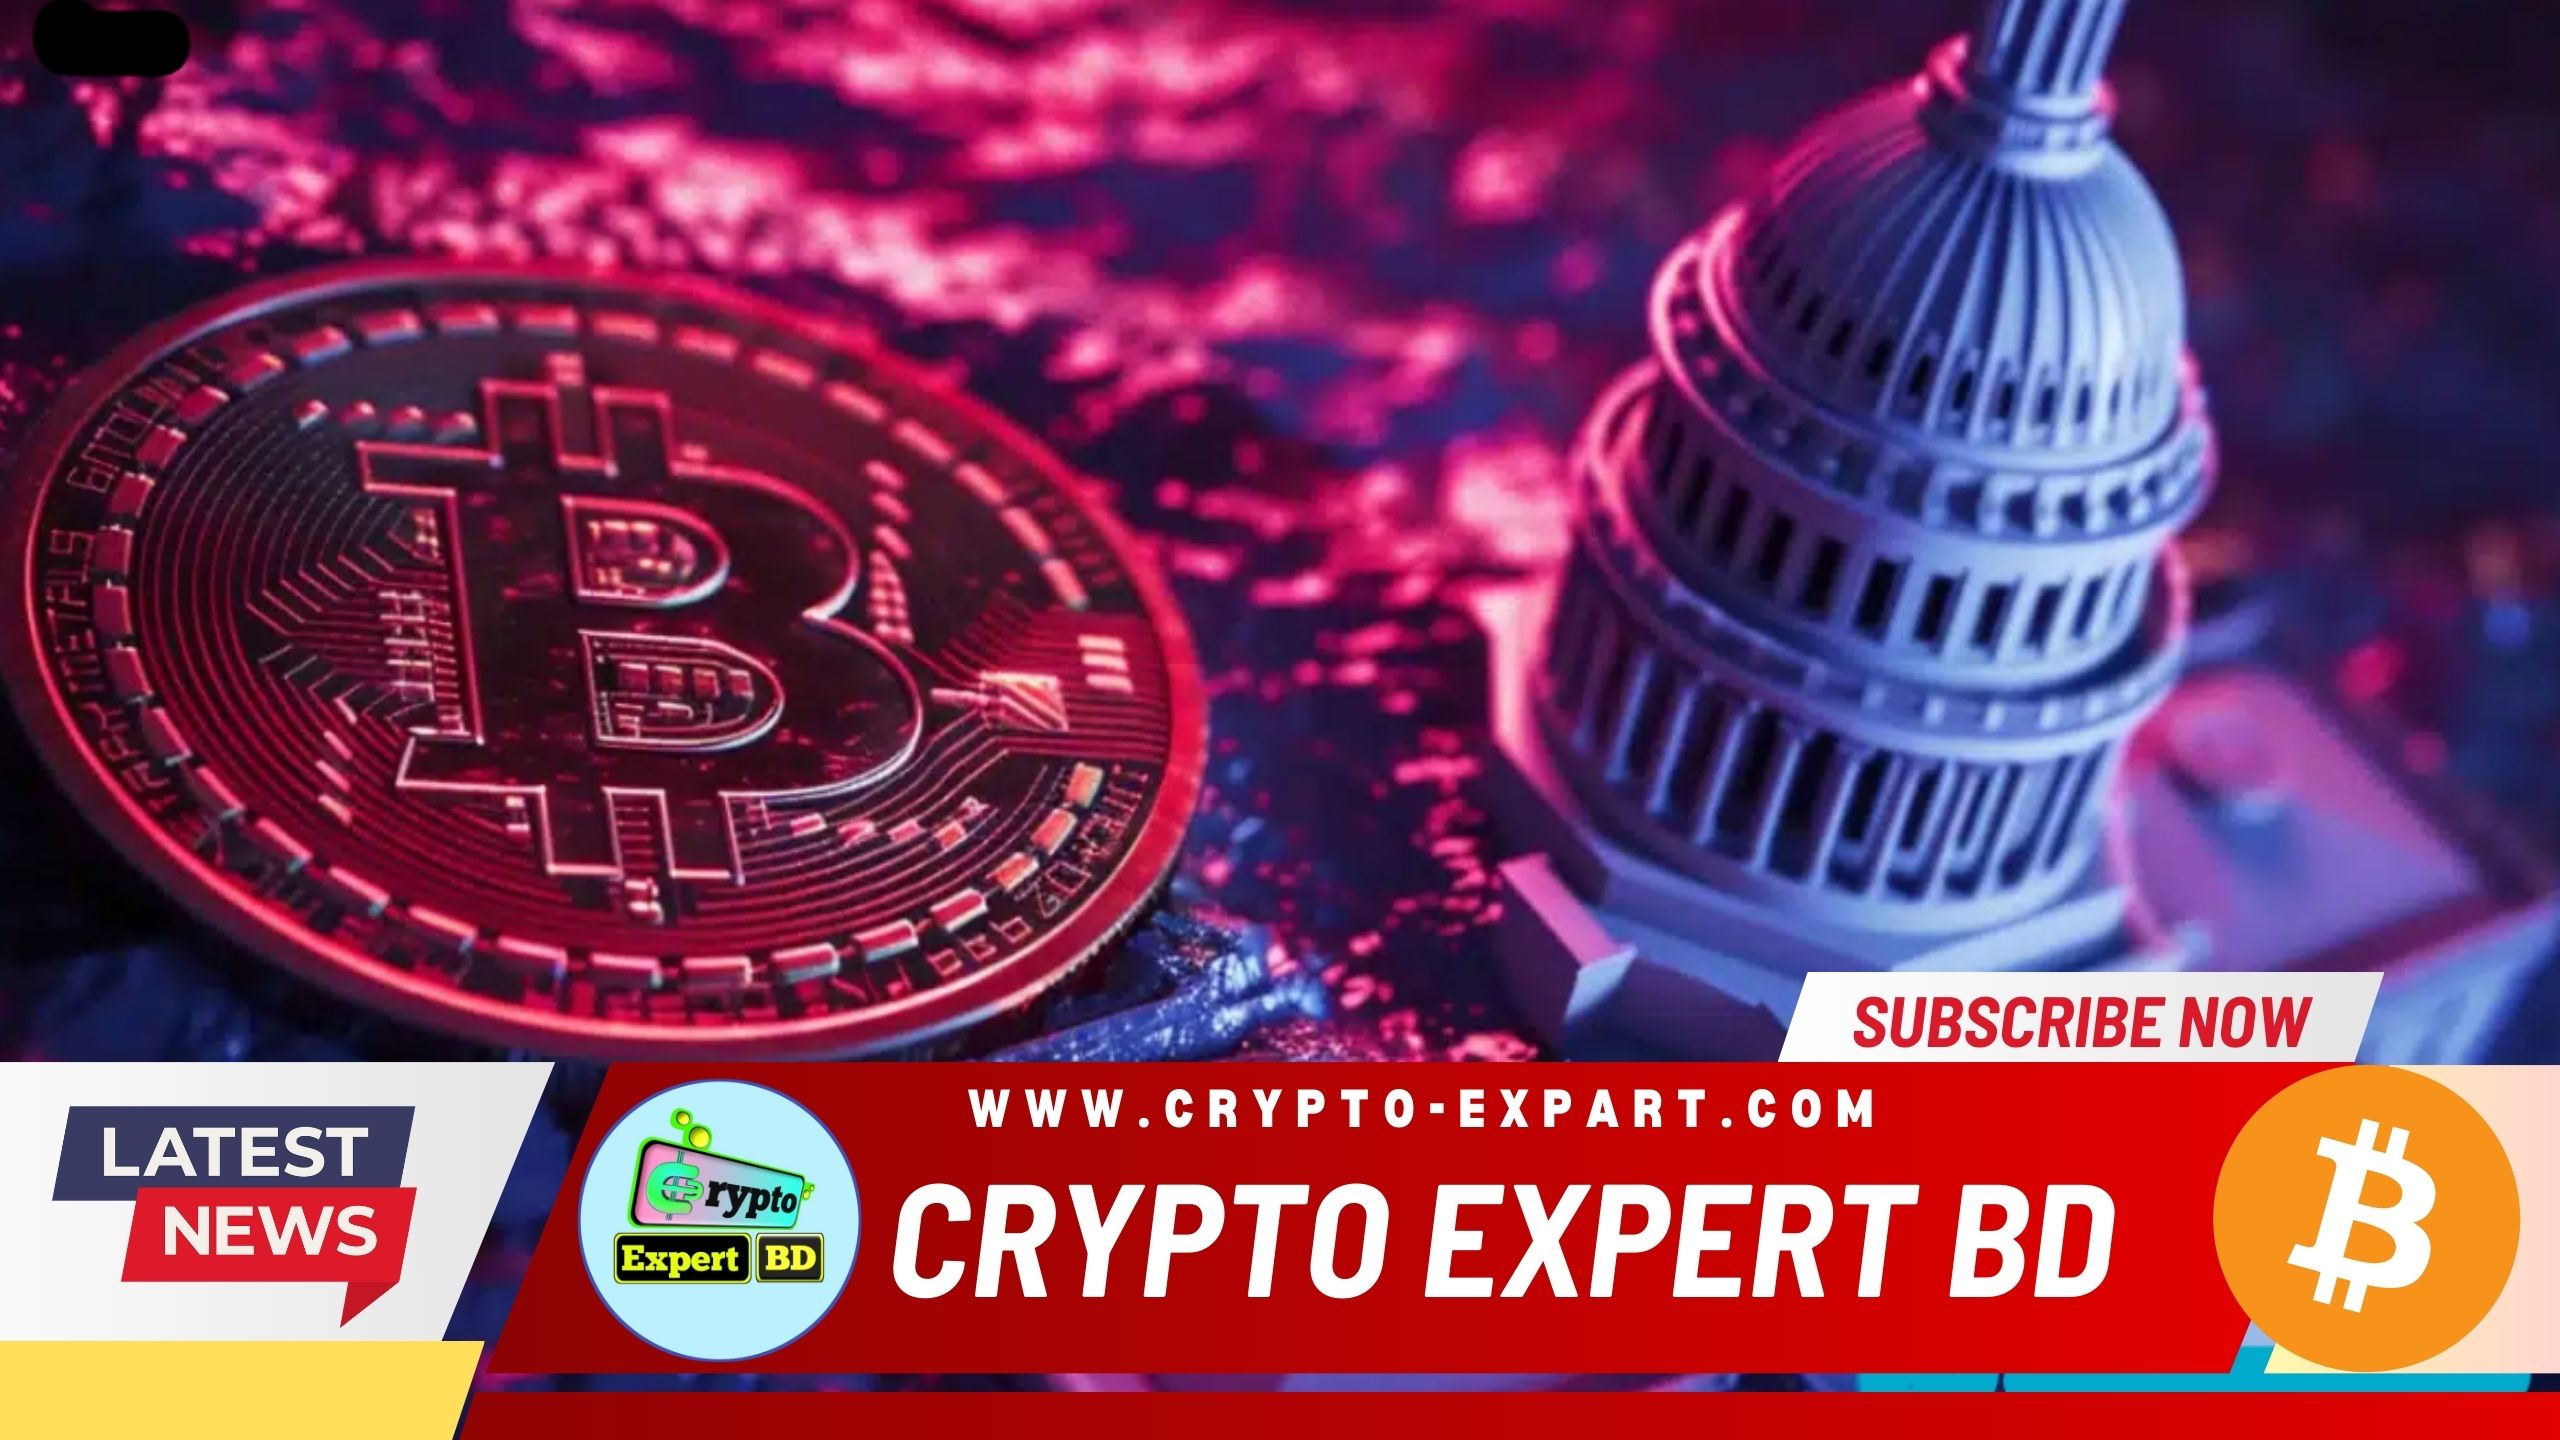 US Political Climate Could Redefine Crypto Regulations, Says Legal Expert